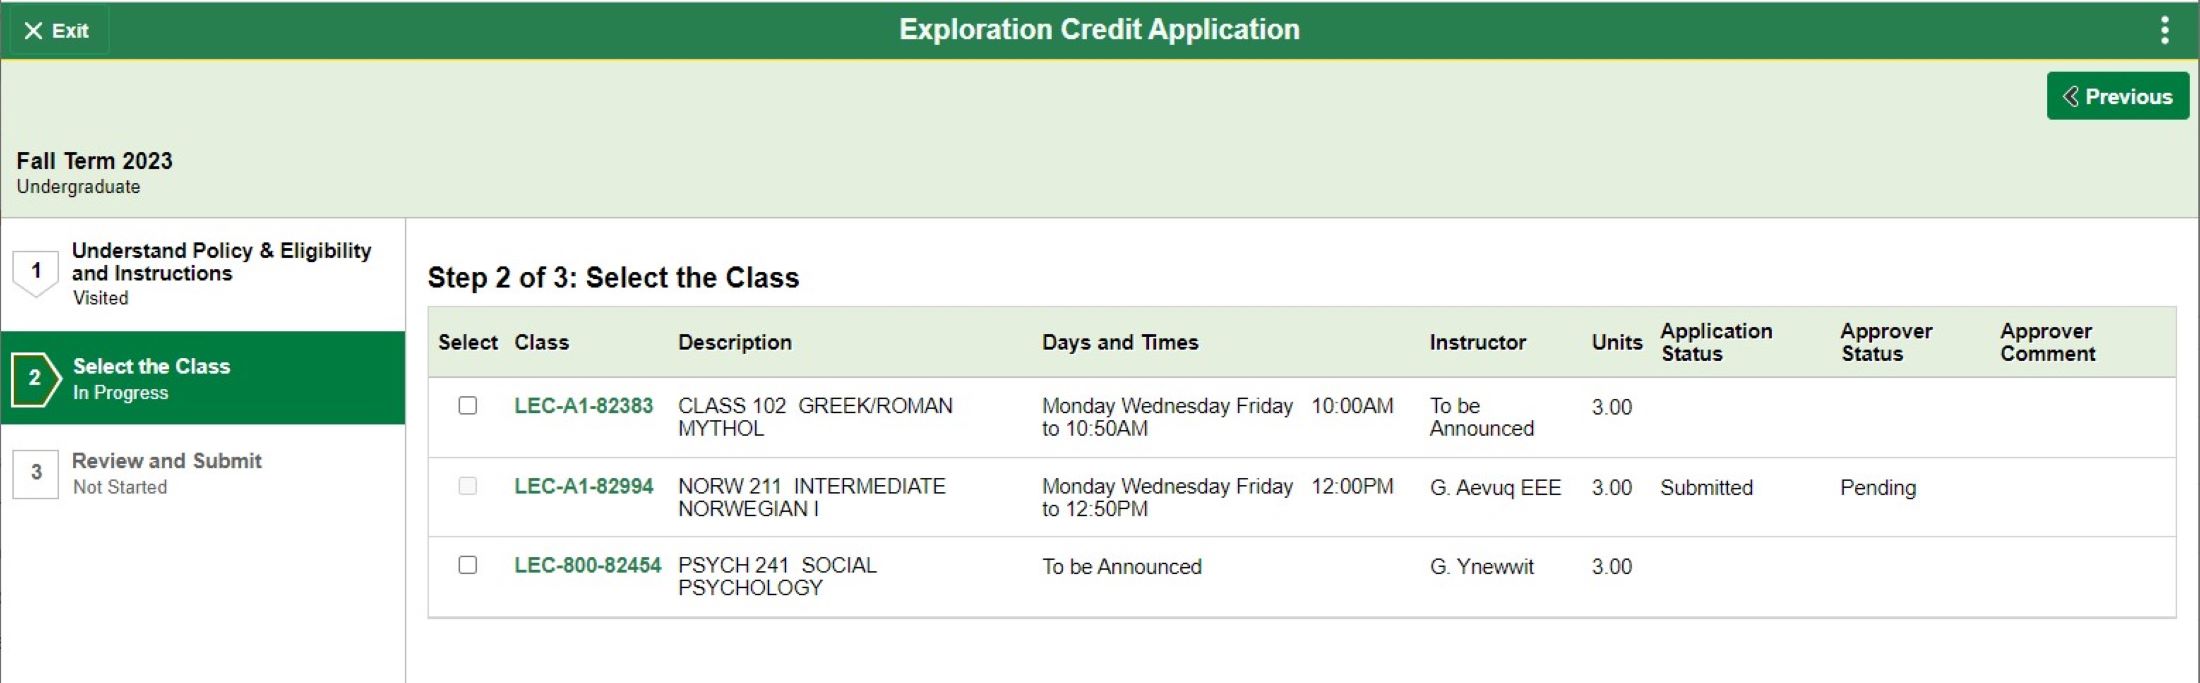 The Select the Class screen in the Exploration Credit Application. This example shows that one of the three class options previously mentioned now lists Submitted in the Application Status column and Pending in the Approver Status column.